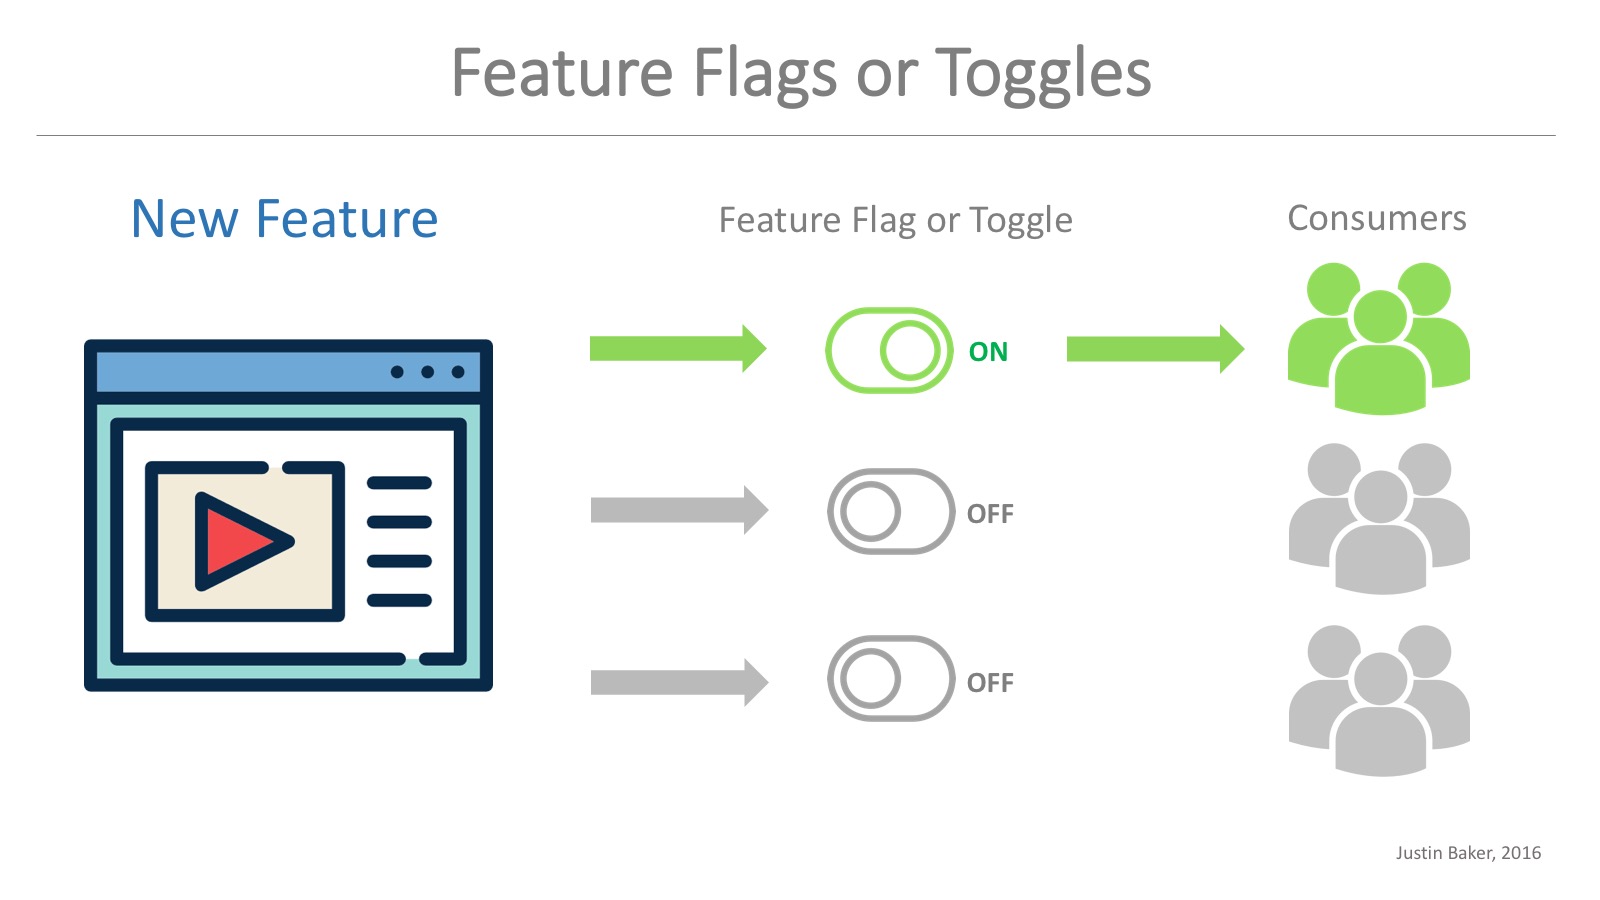 Nom : flags-or-toggles.jpg
Affichages : 10204
Taille : 108,4 Ko